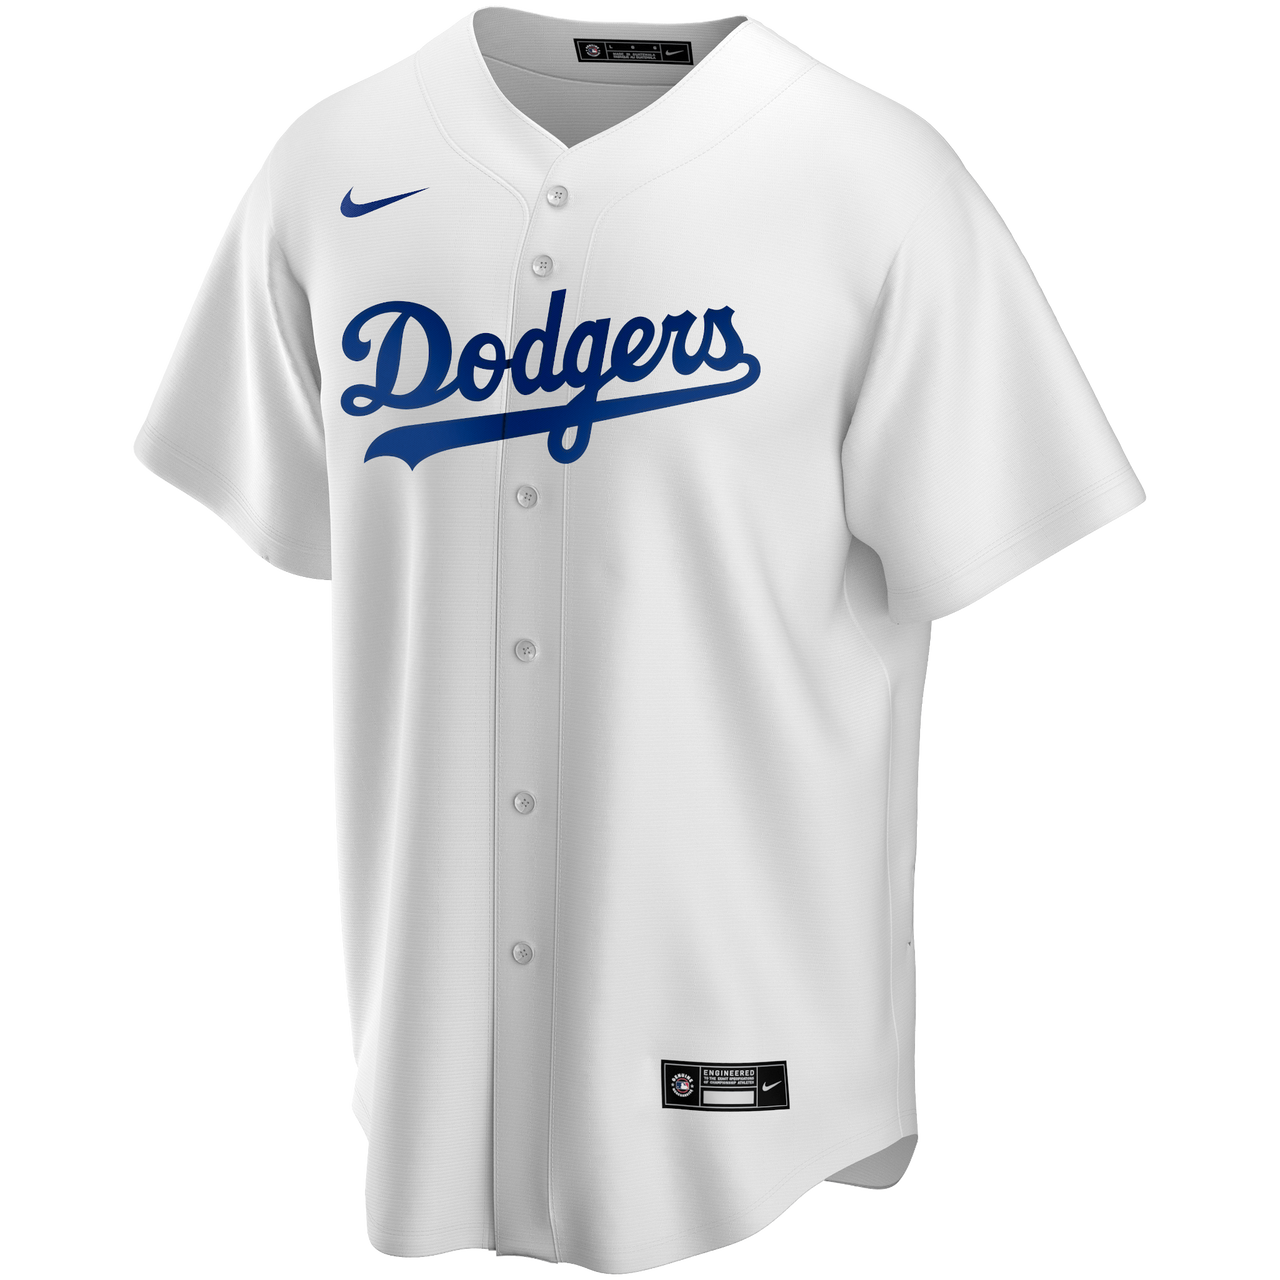 Corey Seager Youth Jersey - LA Dodgers Replica Kids Home Jersey